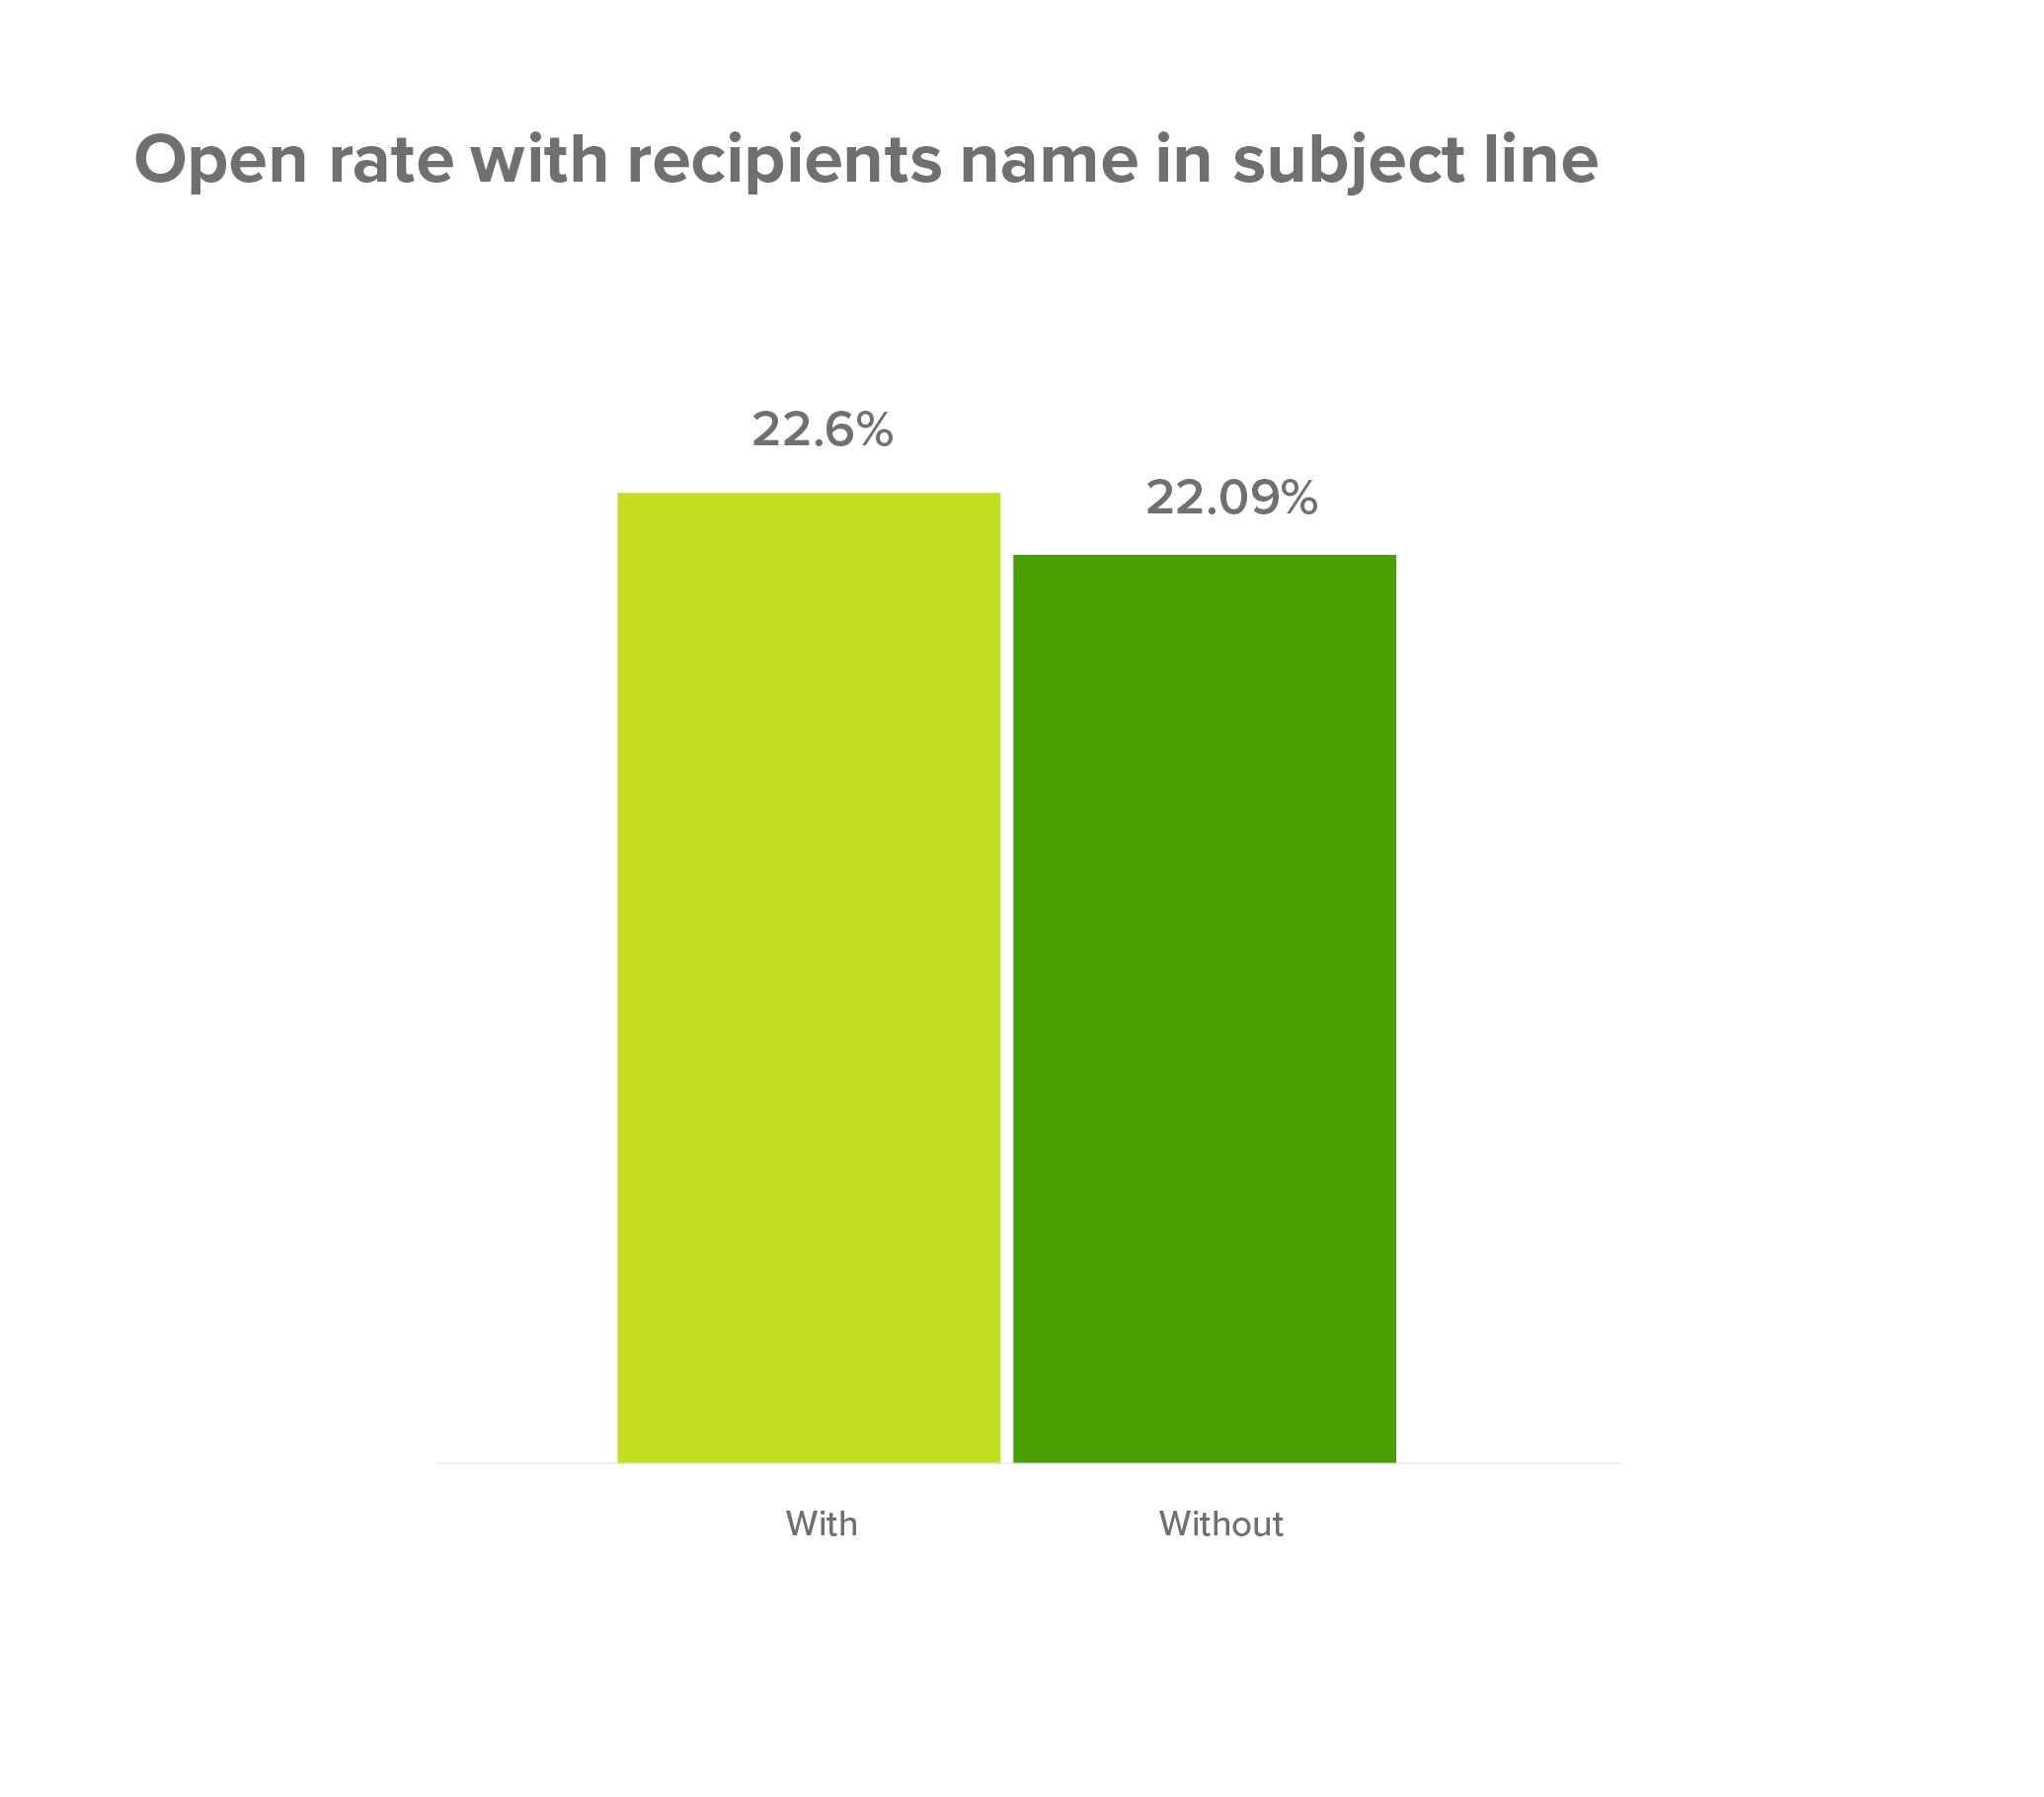 Open rate with recipients name in subject line